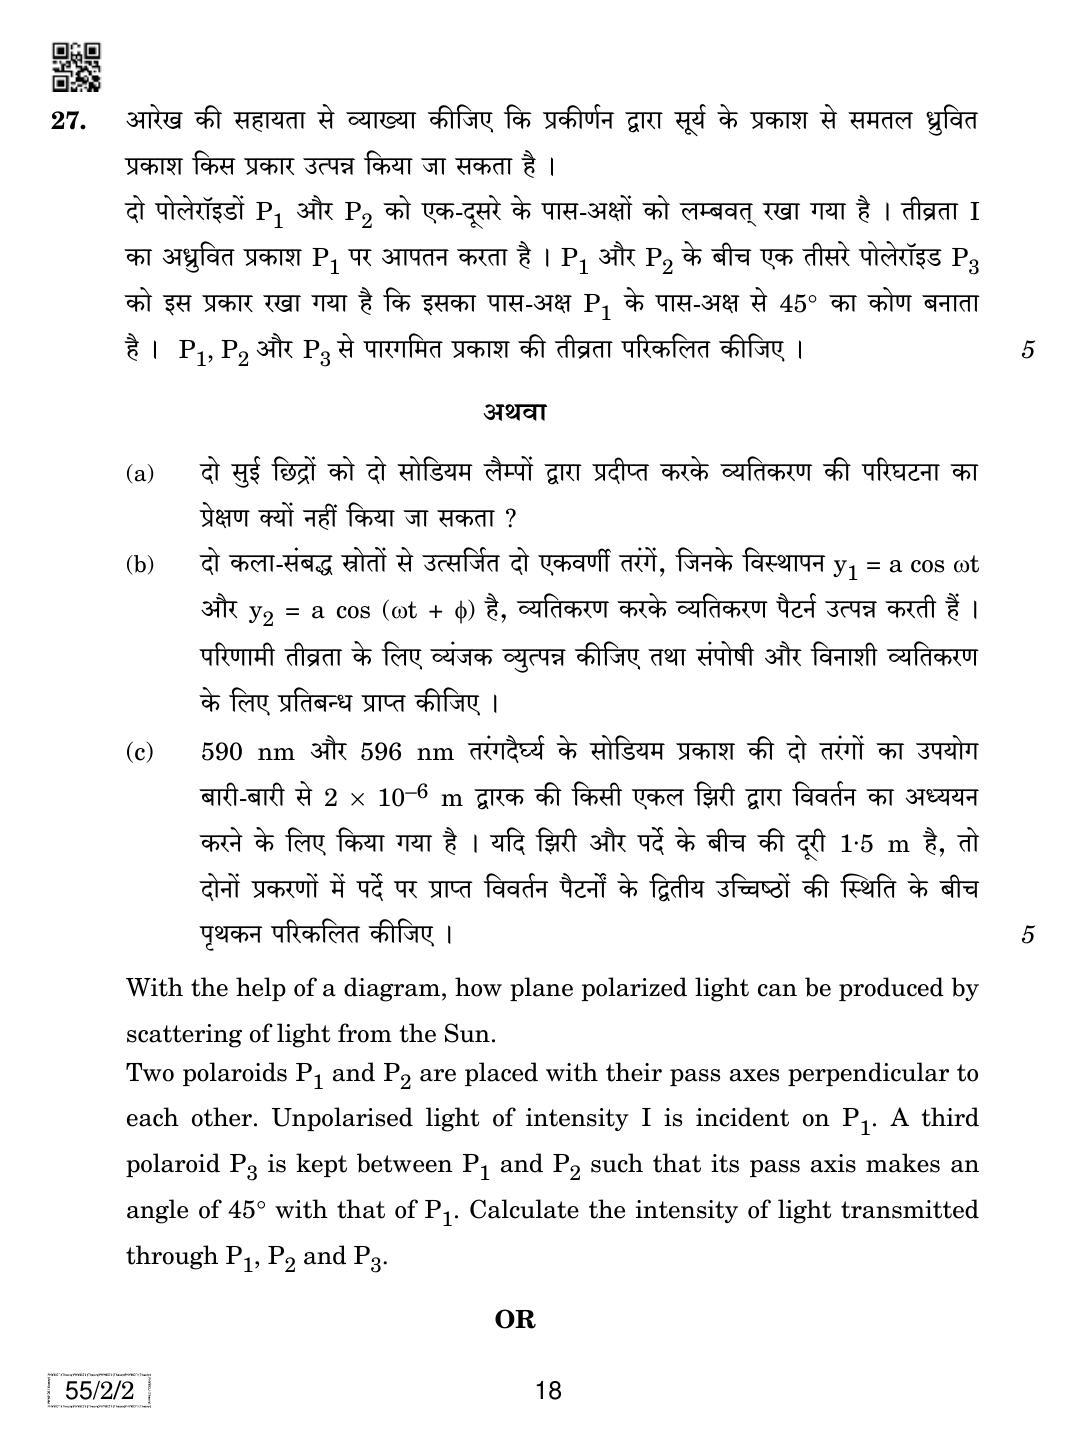 CBSE Class 12 55-2-2 Physics 2019 Question Paper - Page 18